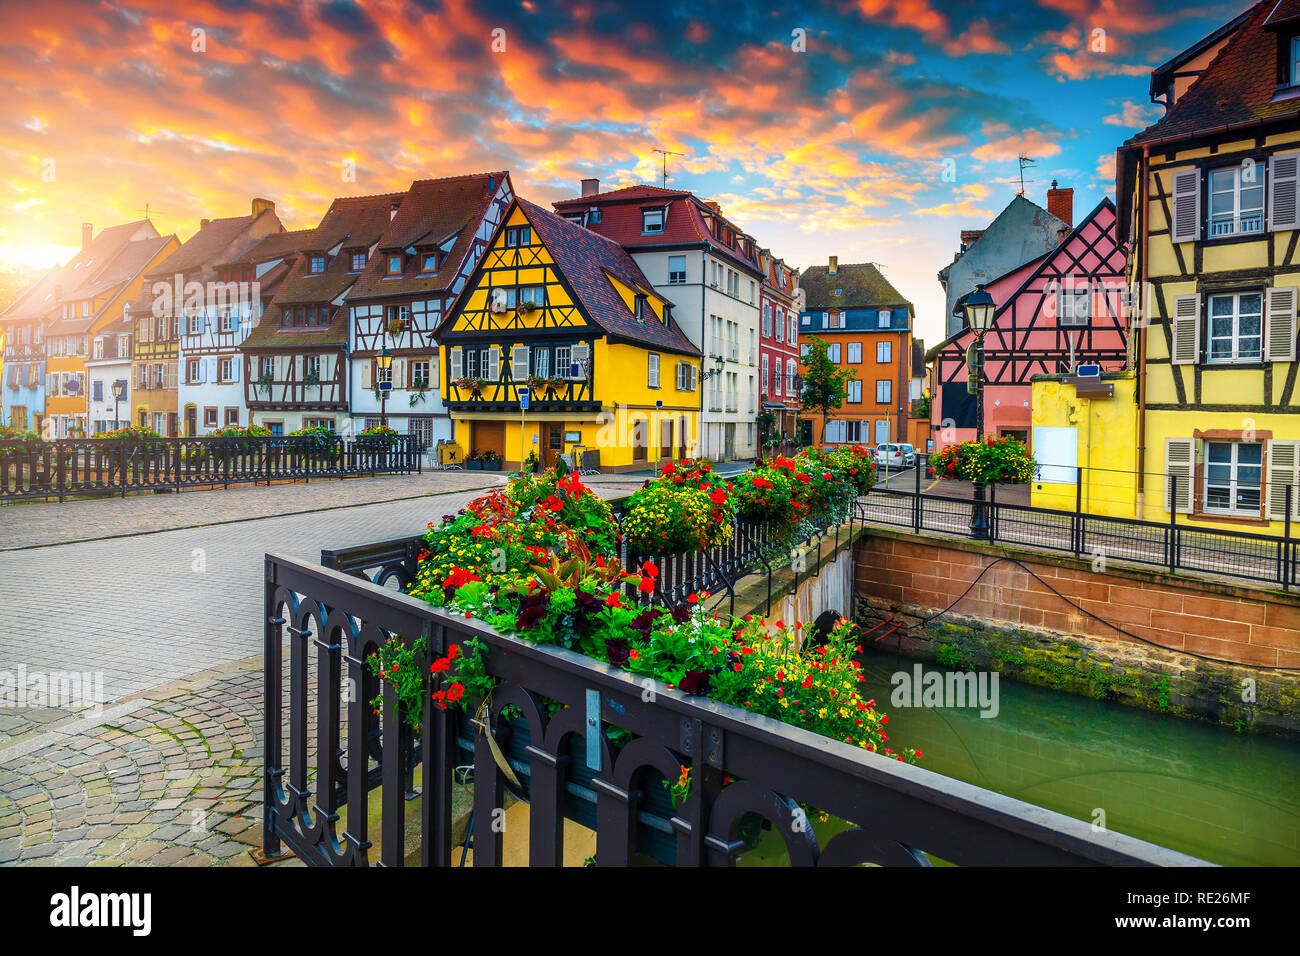 Famous excursion place and travel destination. Wonderful street view with colorful buildings and flowers, Colmar, France, Europe Stock Photo